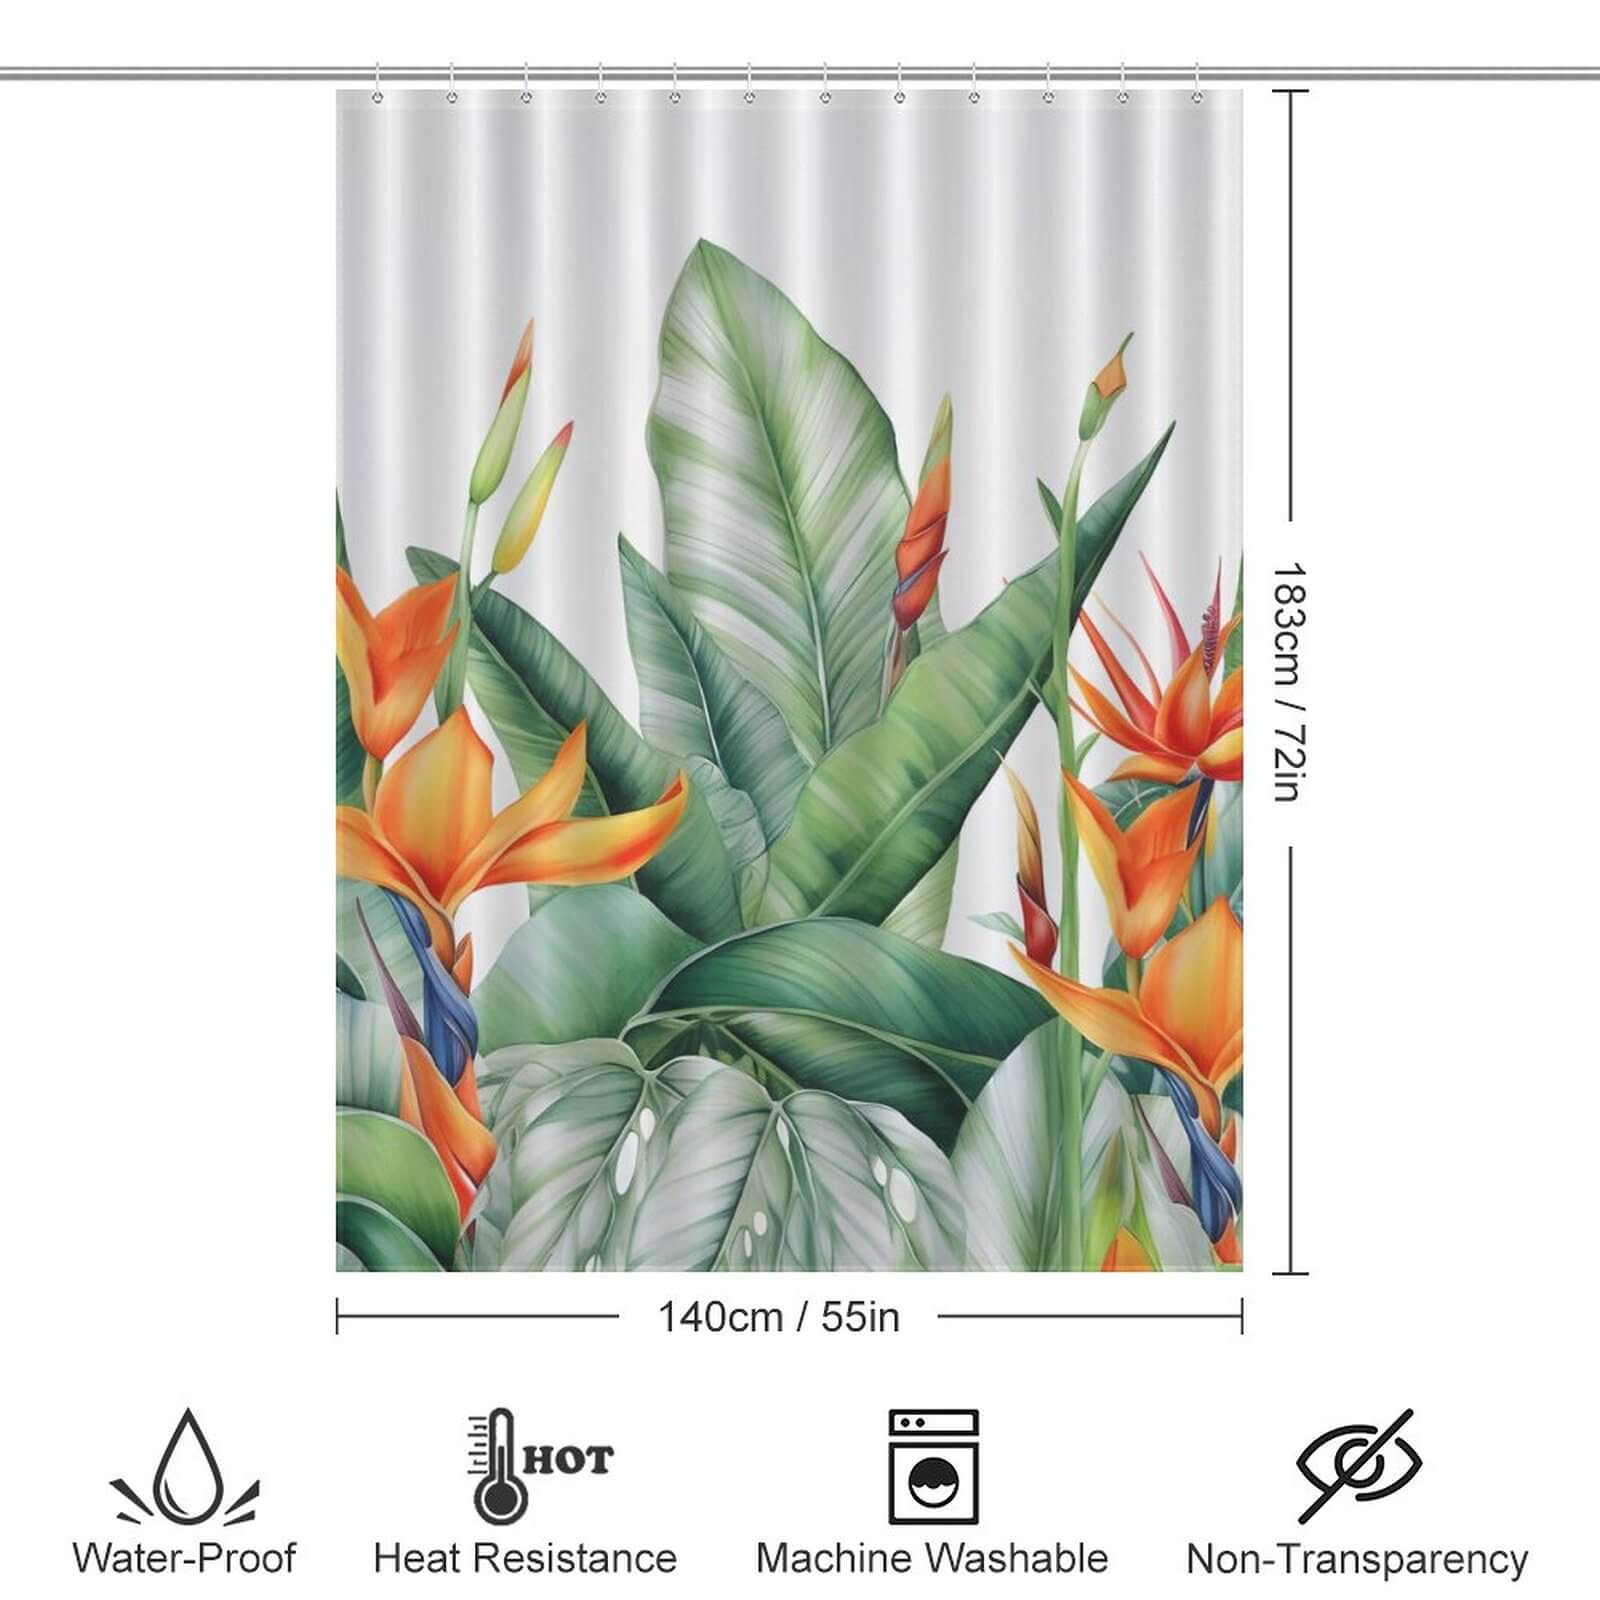 Botanical Jungle shower curtain by Cotton Cat.